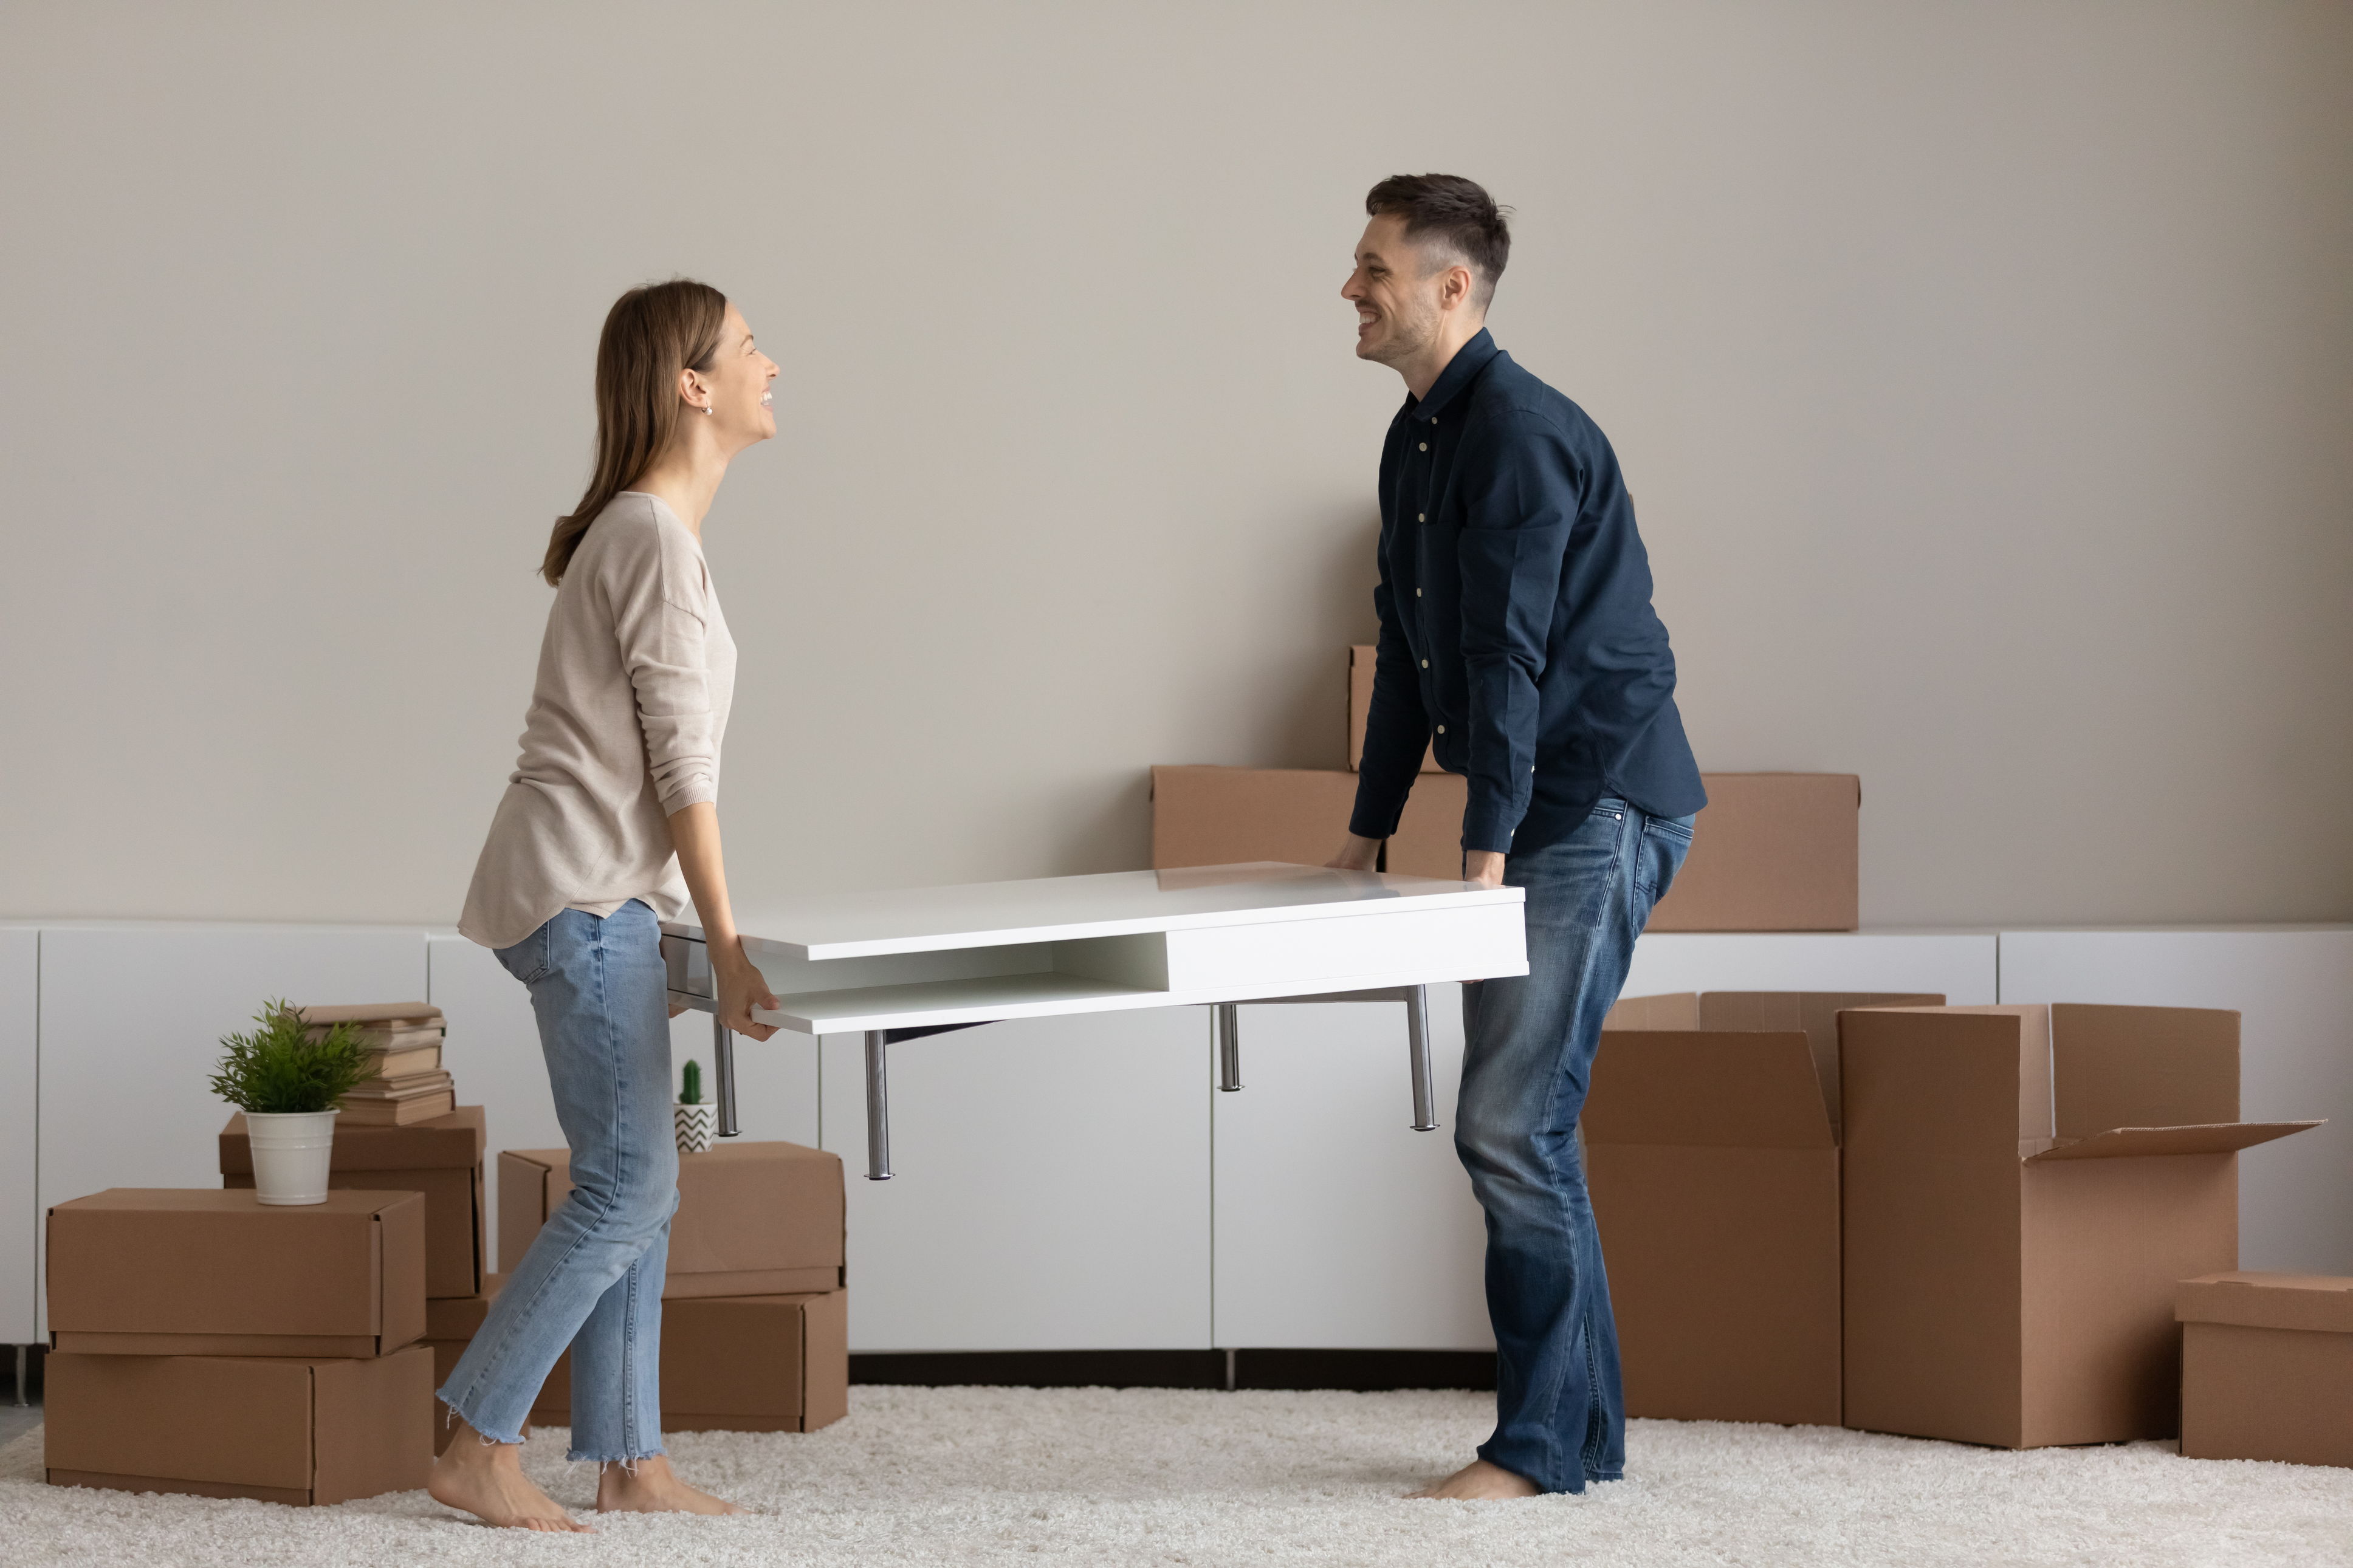 Furnished or Unfurnished - What’s the Best Way To Let Your Property?